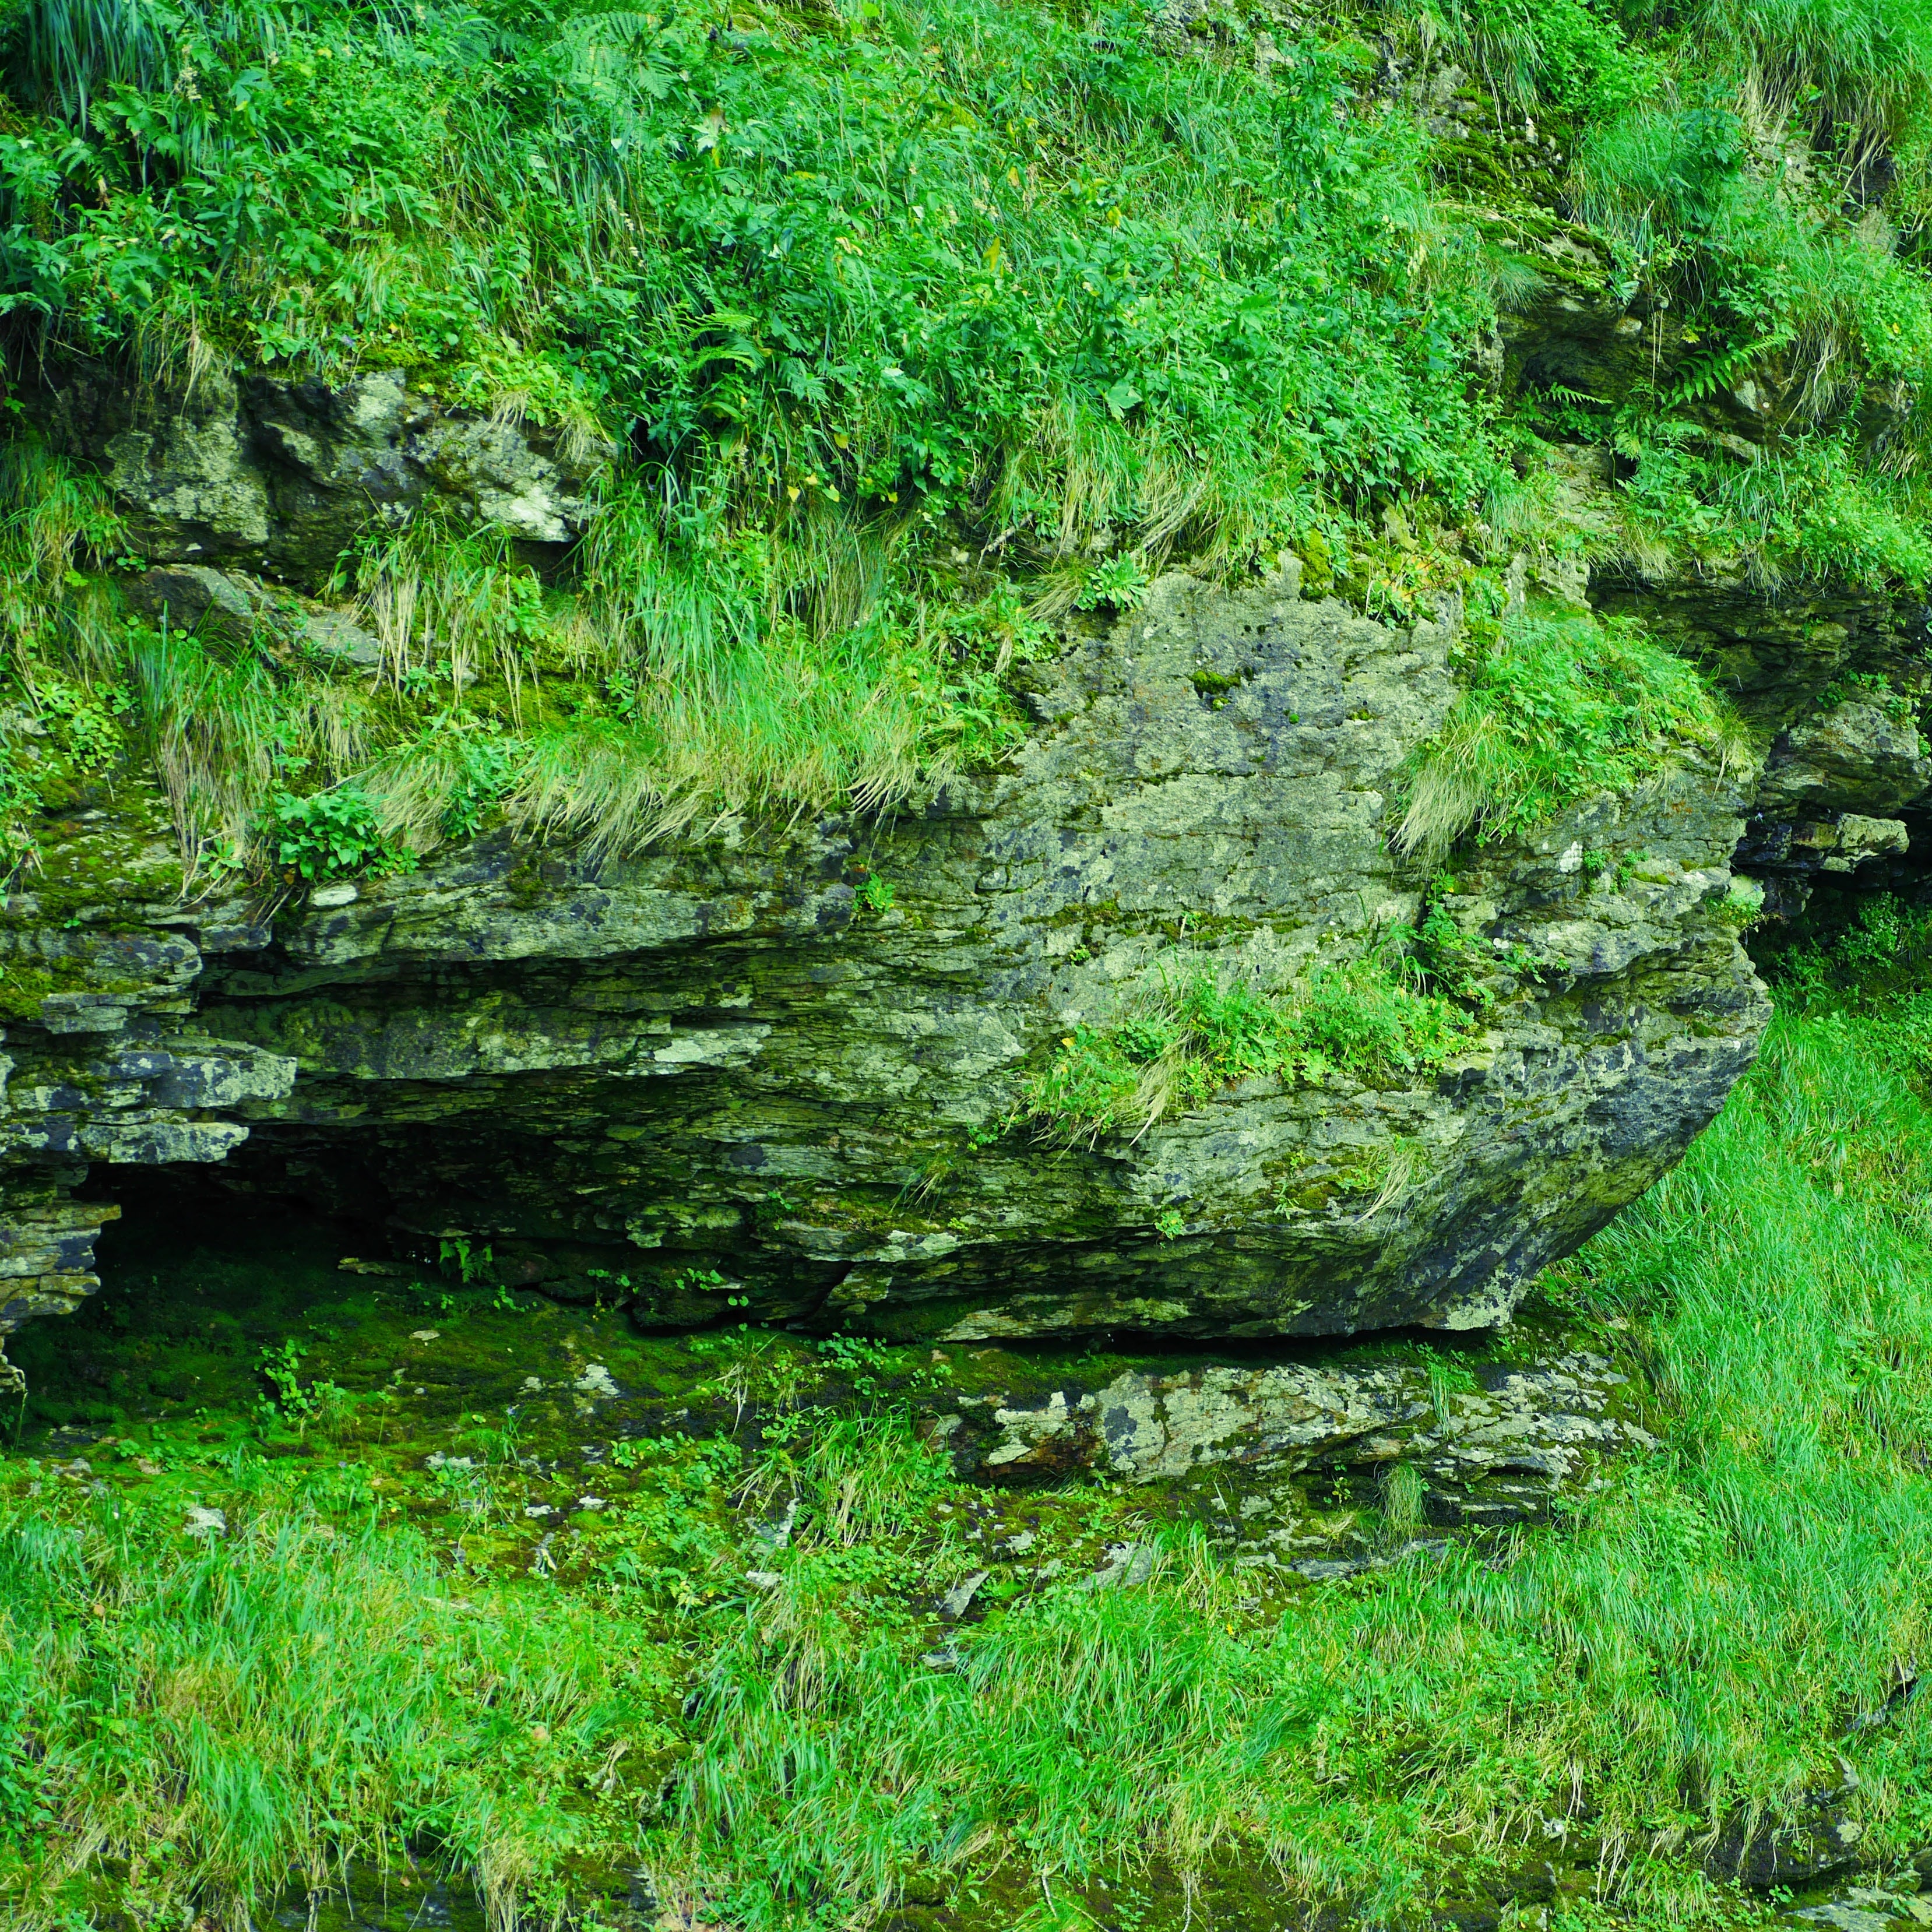 Green, Fouling, Nature, Grass, Rock, reflection, nature